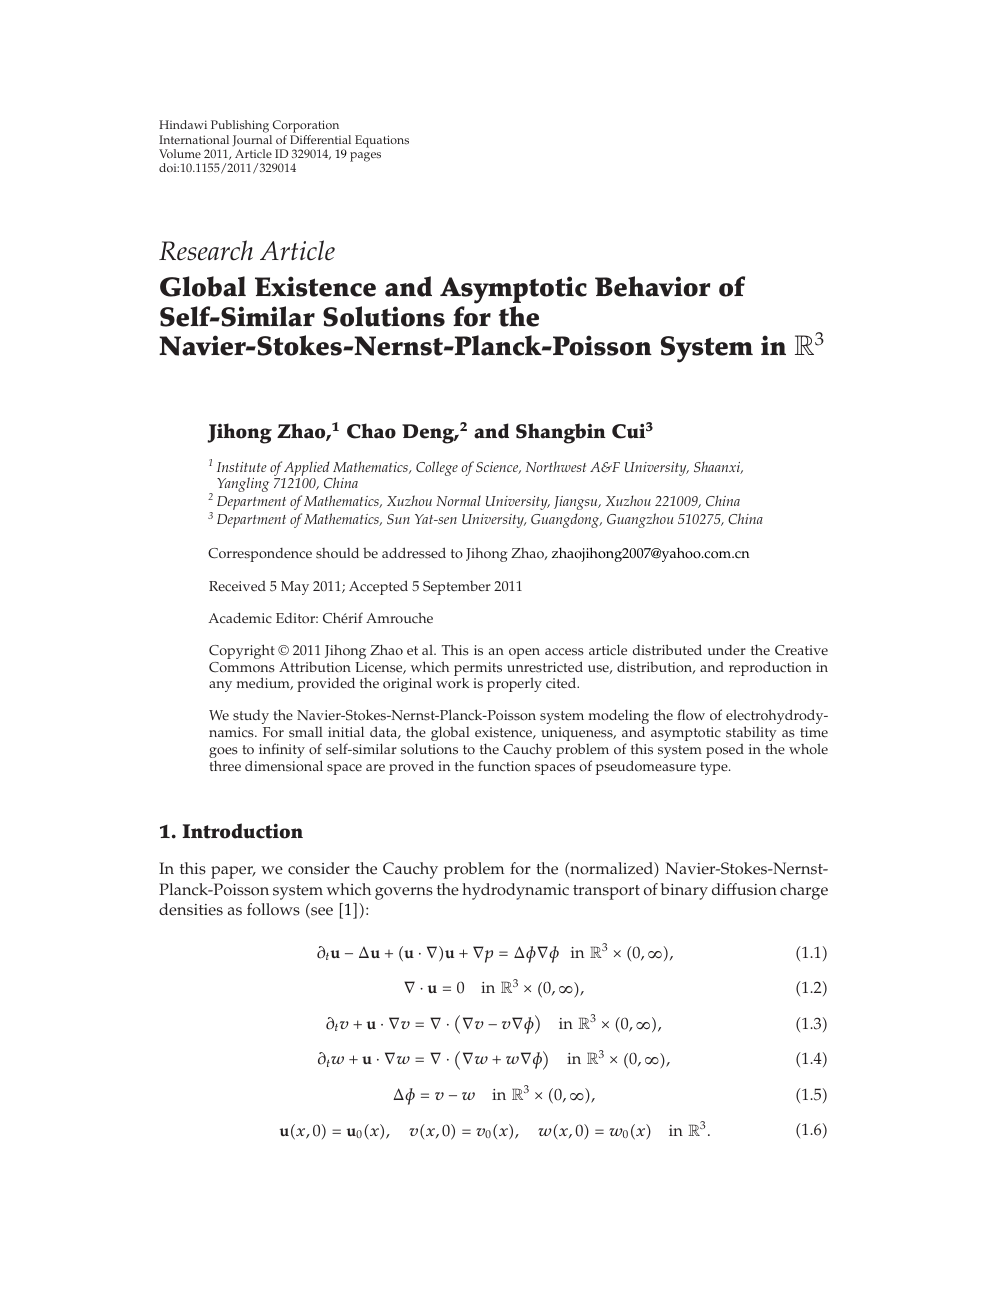 Global Existence And Asymptotic Behavior Of Self Similar Solutions For The Navier Stokes Nernst Planck Poisson System In ℝ3 Topic Of Research Paper In Mathematics Download Scholarly Article Pdf And Read For Free On Cyberleninka Open